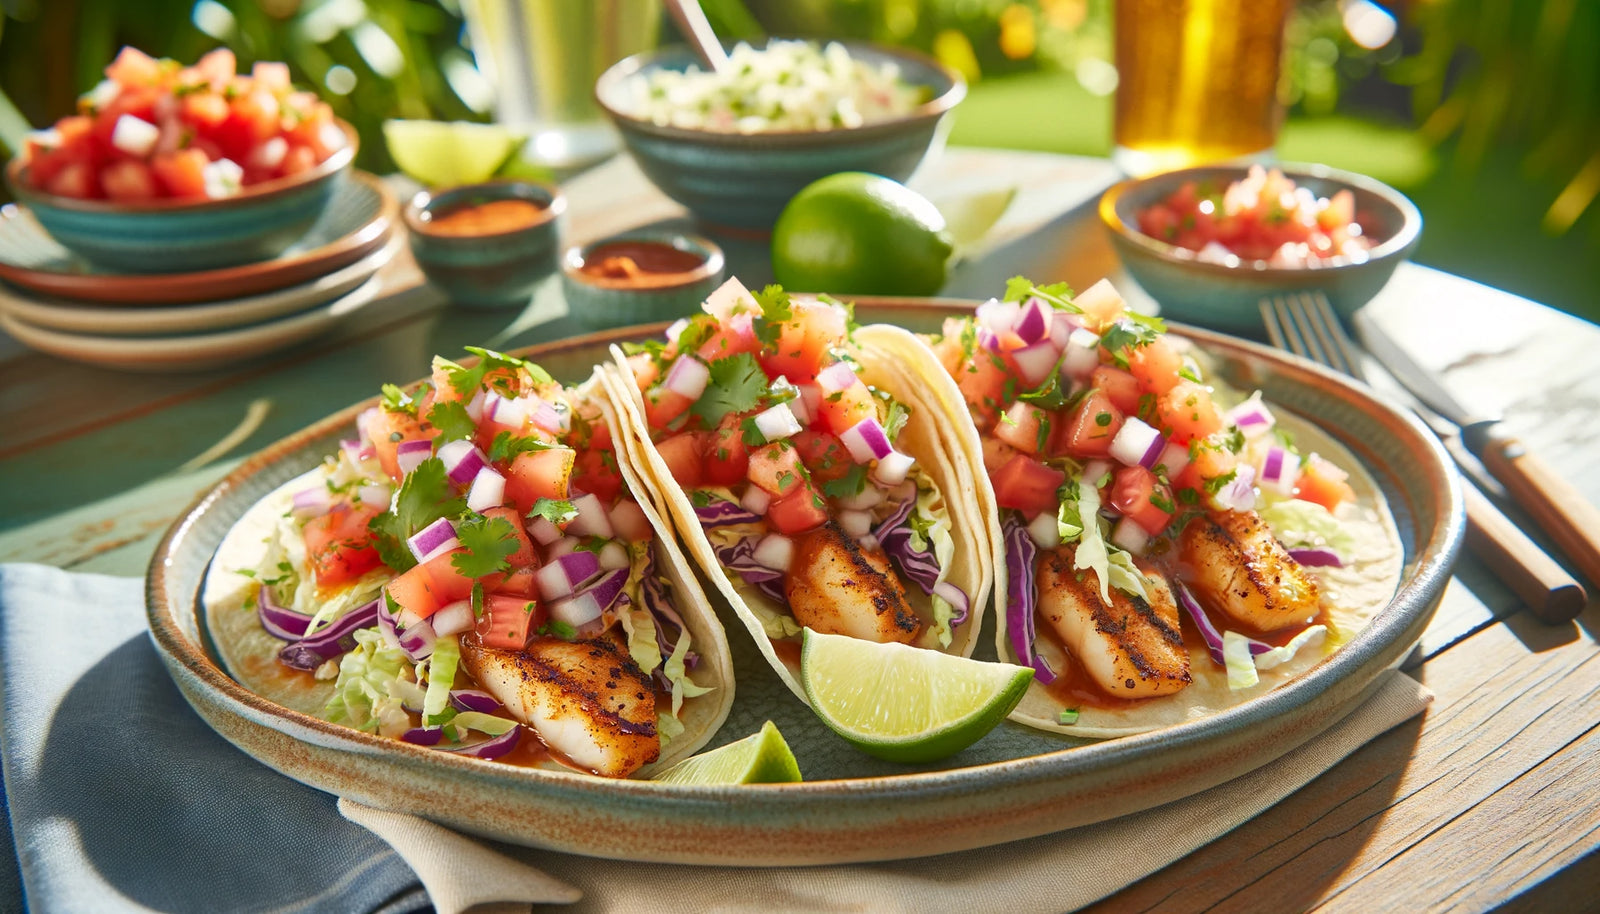 Grilled Fish Taco Recipe on the Arteflame Grill